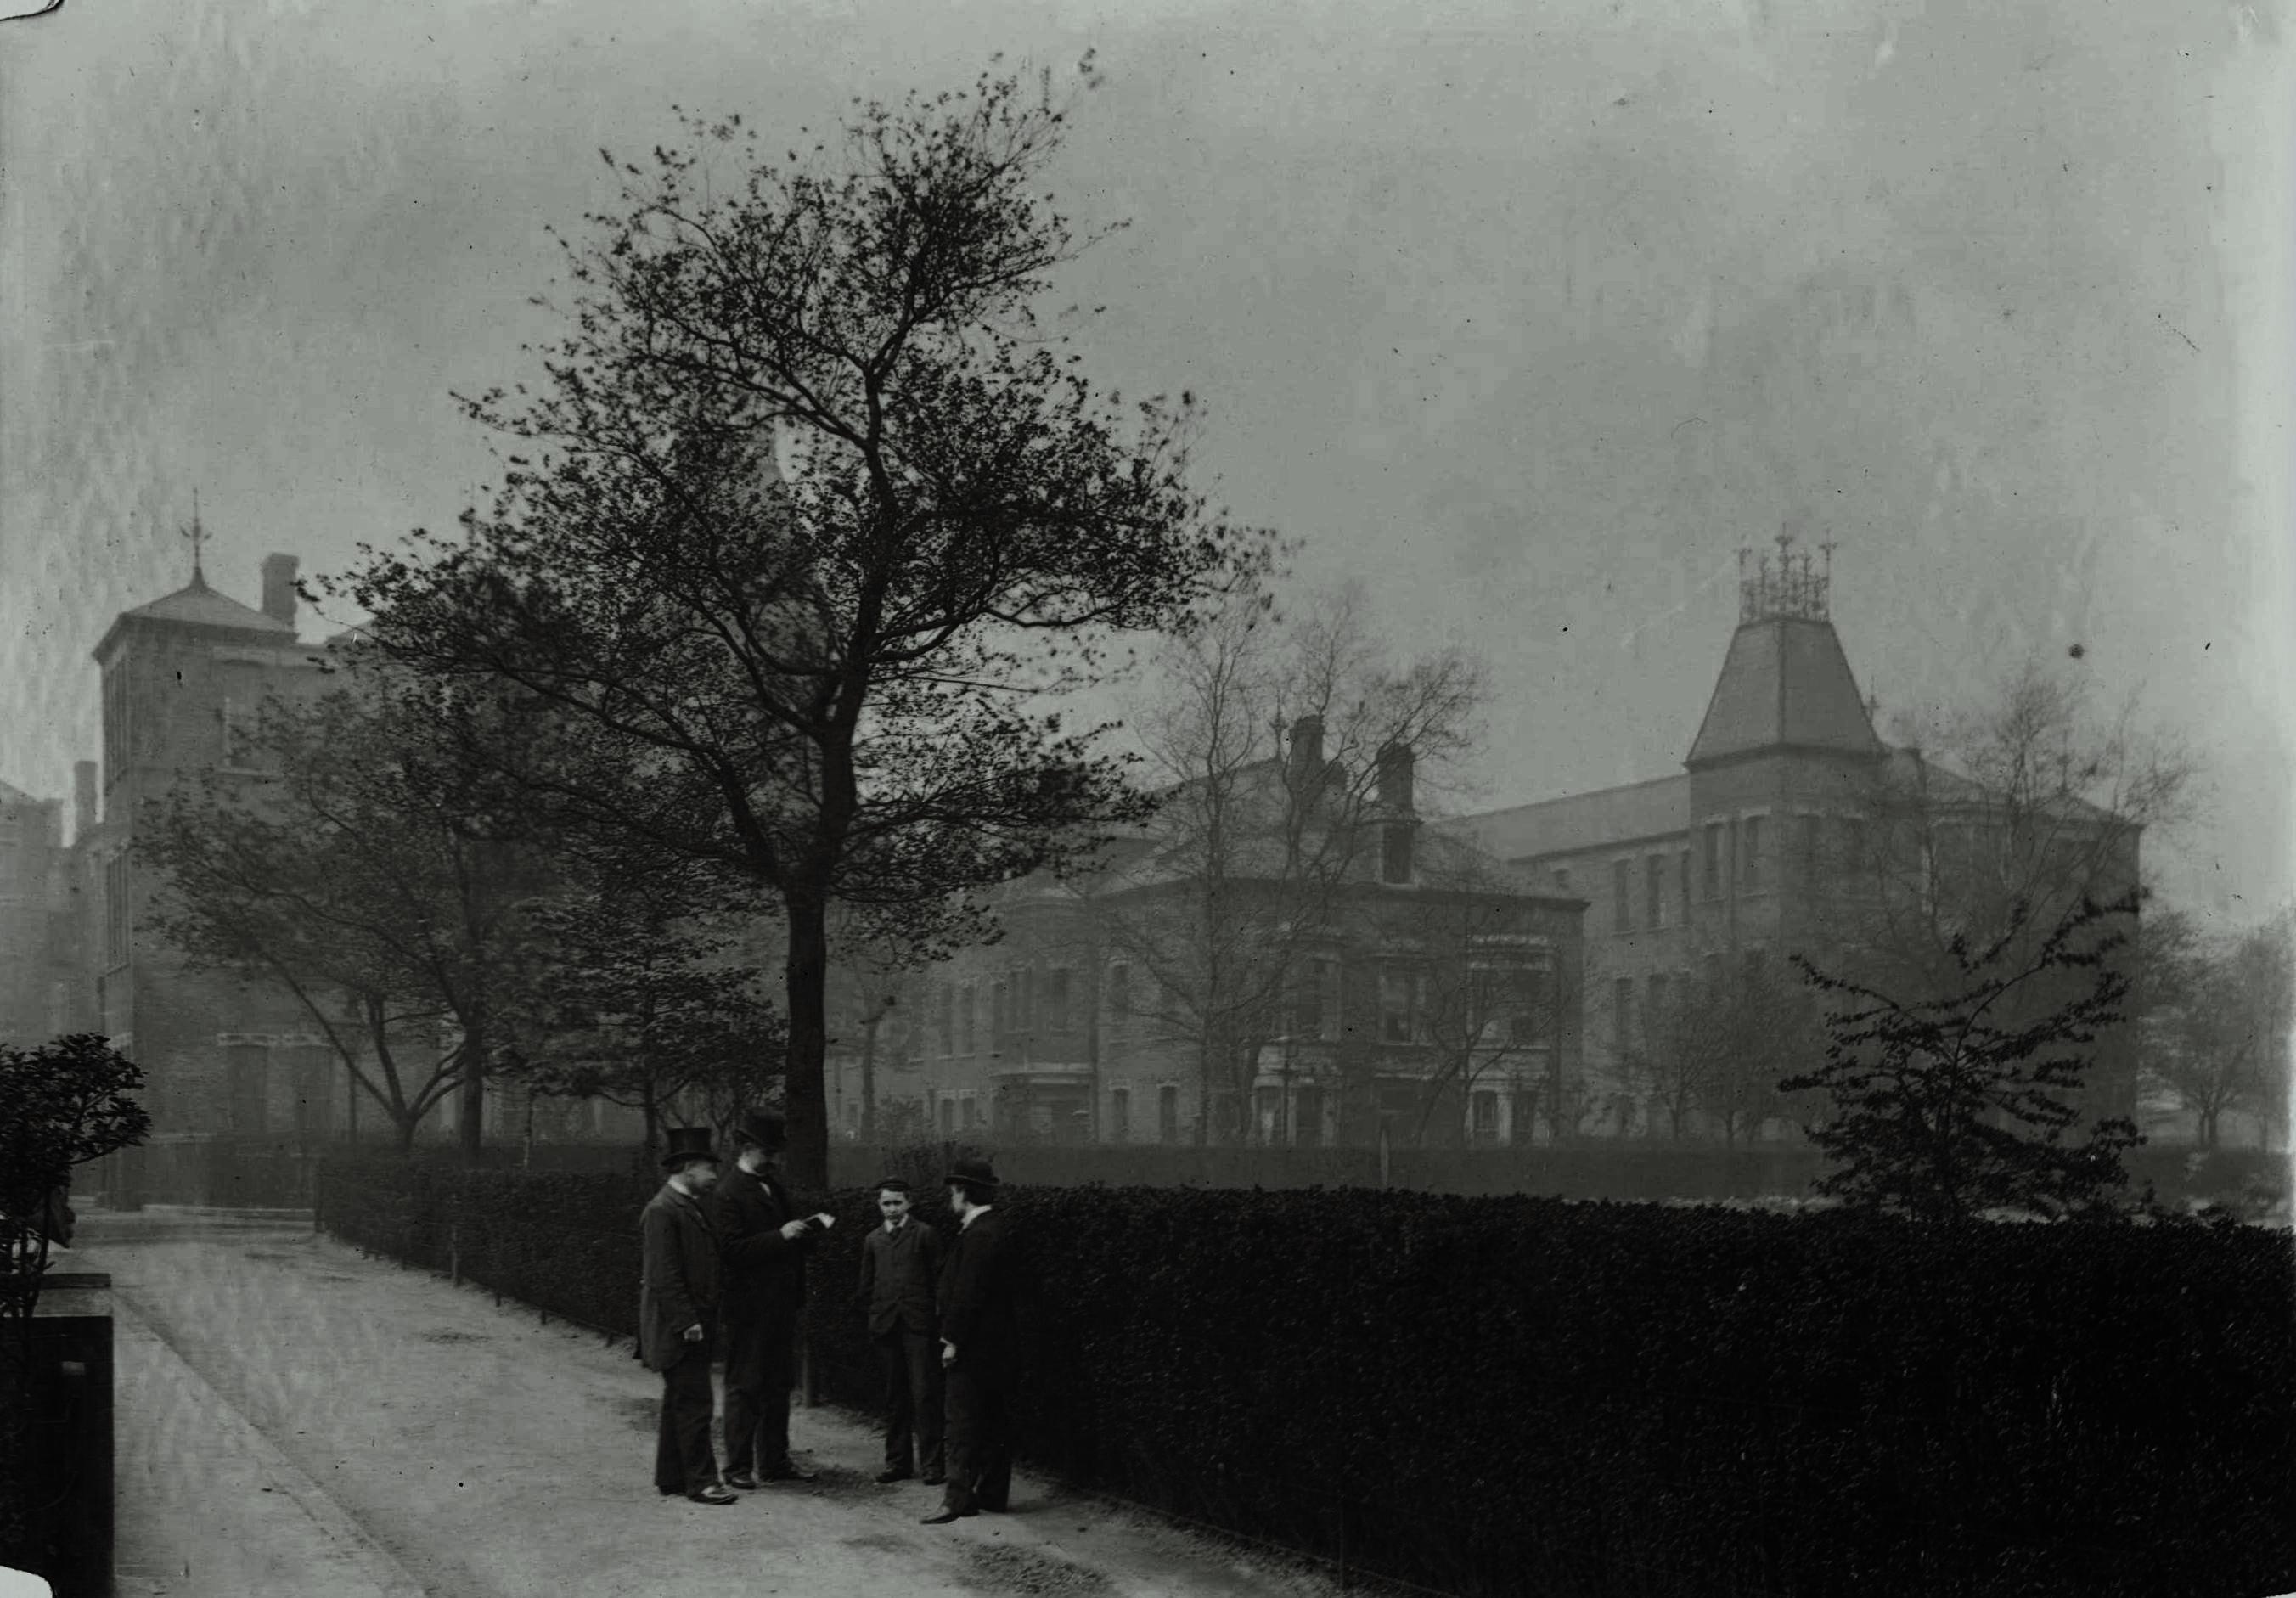 The new infirmary, providing beds for 500 patients, was opened in March 1883. It was designed by John Knight and built by W&F Croaker, and provided bright nightingale style wards with windows on both sides.